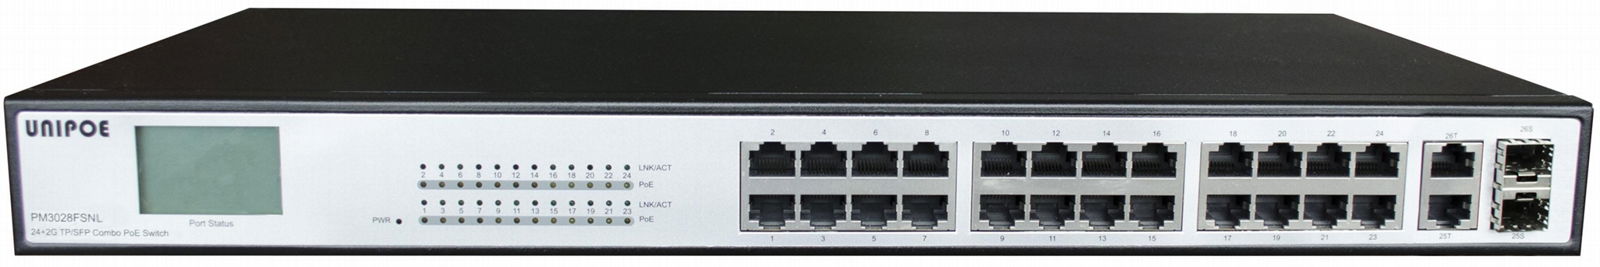 UNIPOE 24+2G TP/SFP Combo PoE switch with LCD display 5